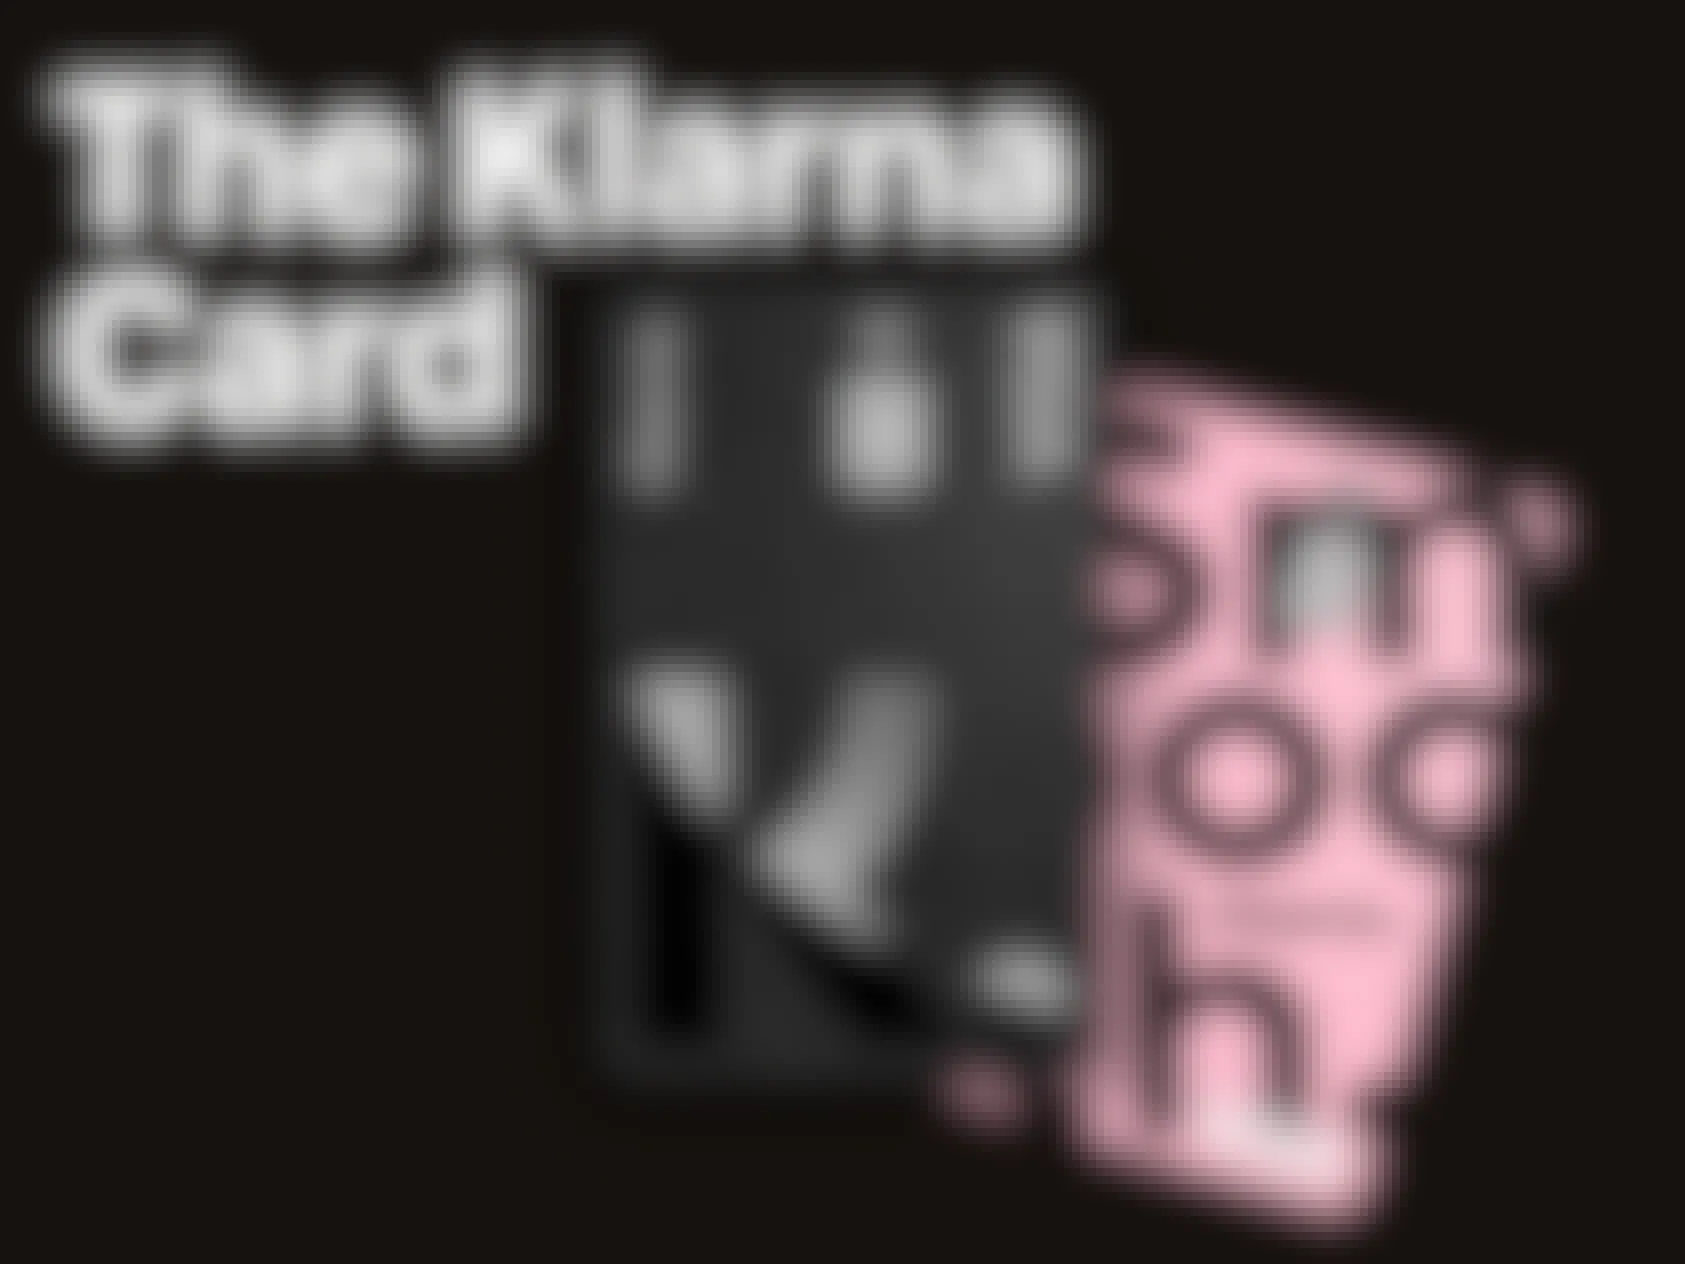 Klarna credit card graphic on a black background with the words The Klarna card in white beside it.